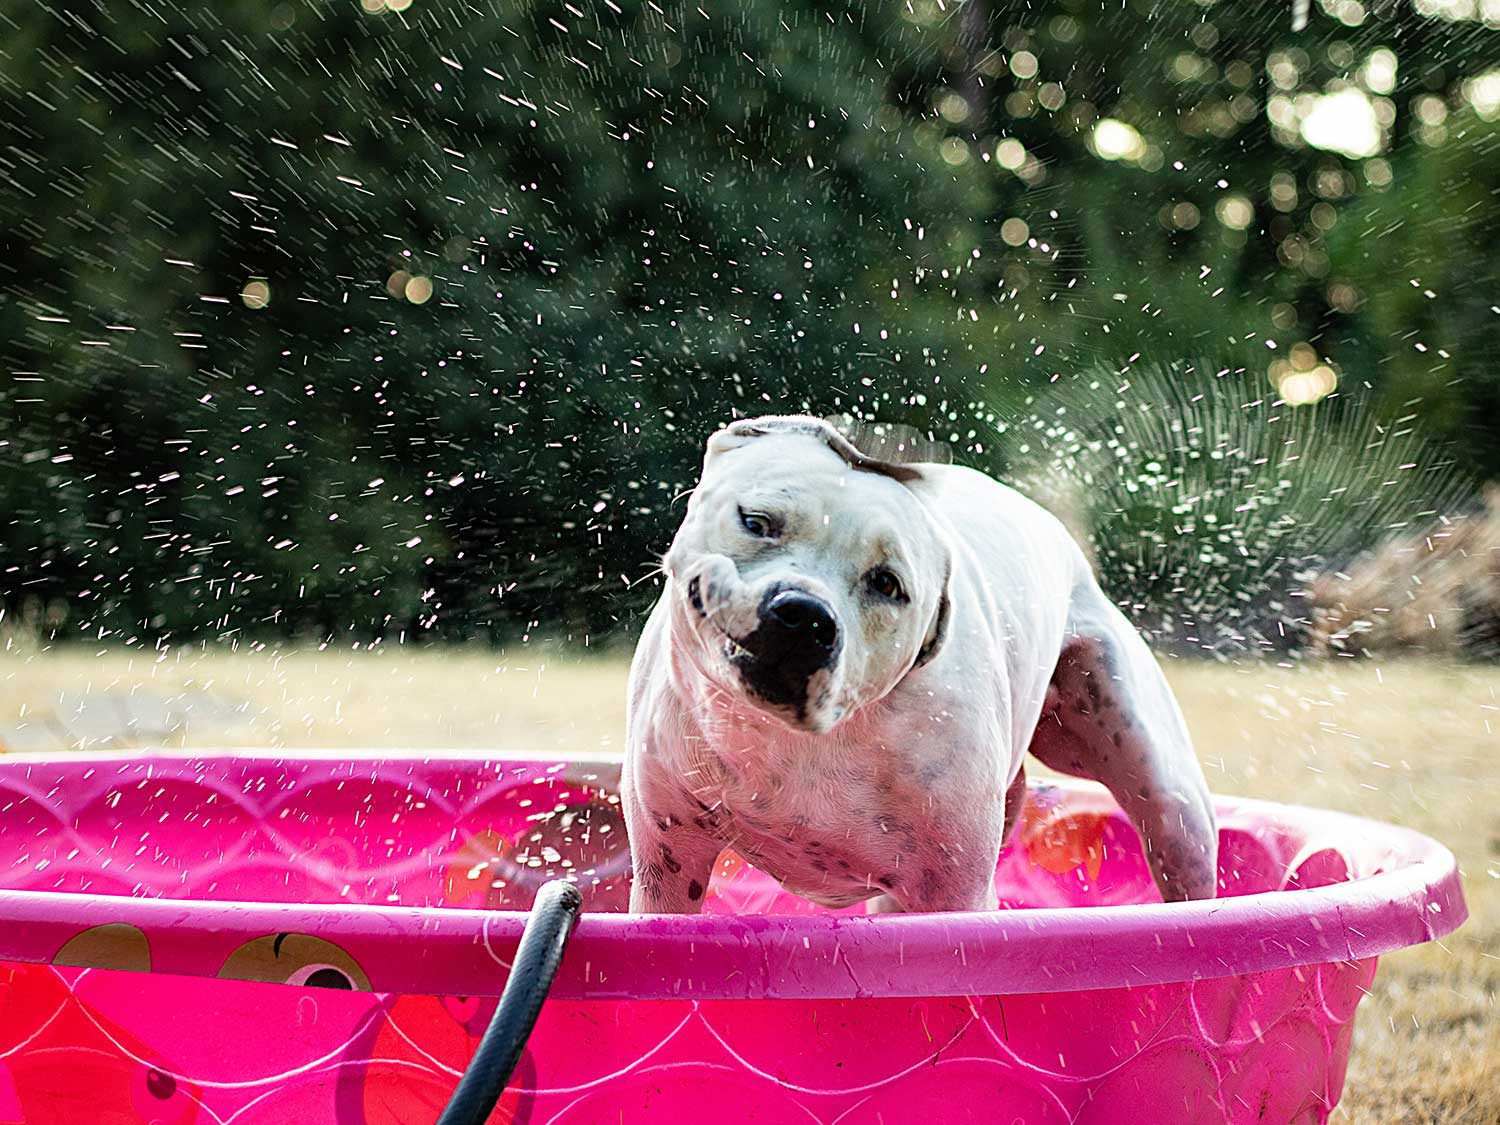 Dog playing in kiddy pool with hose.